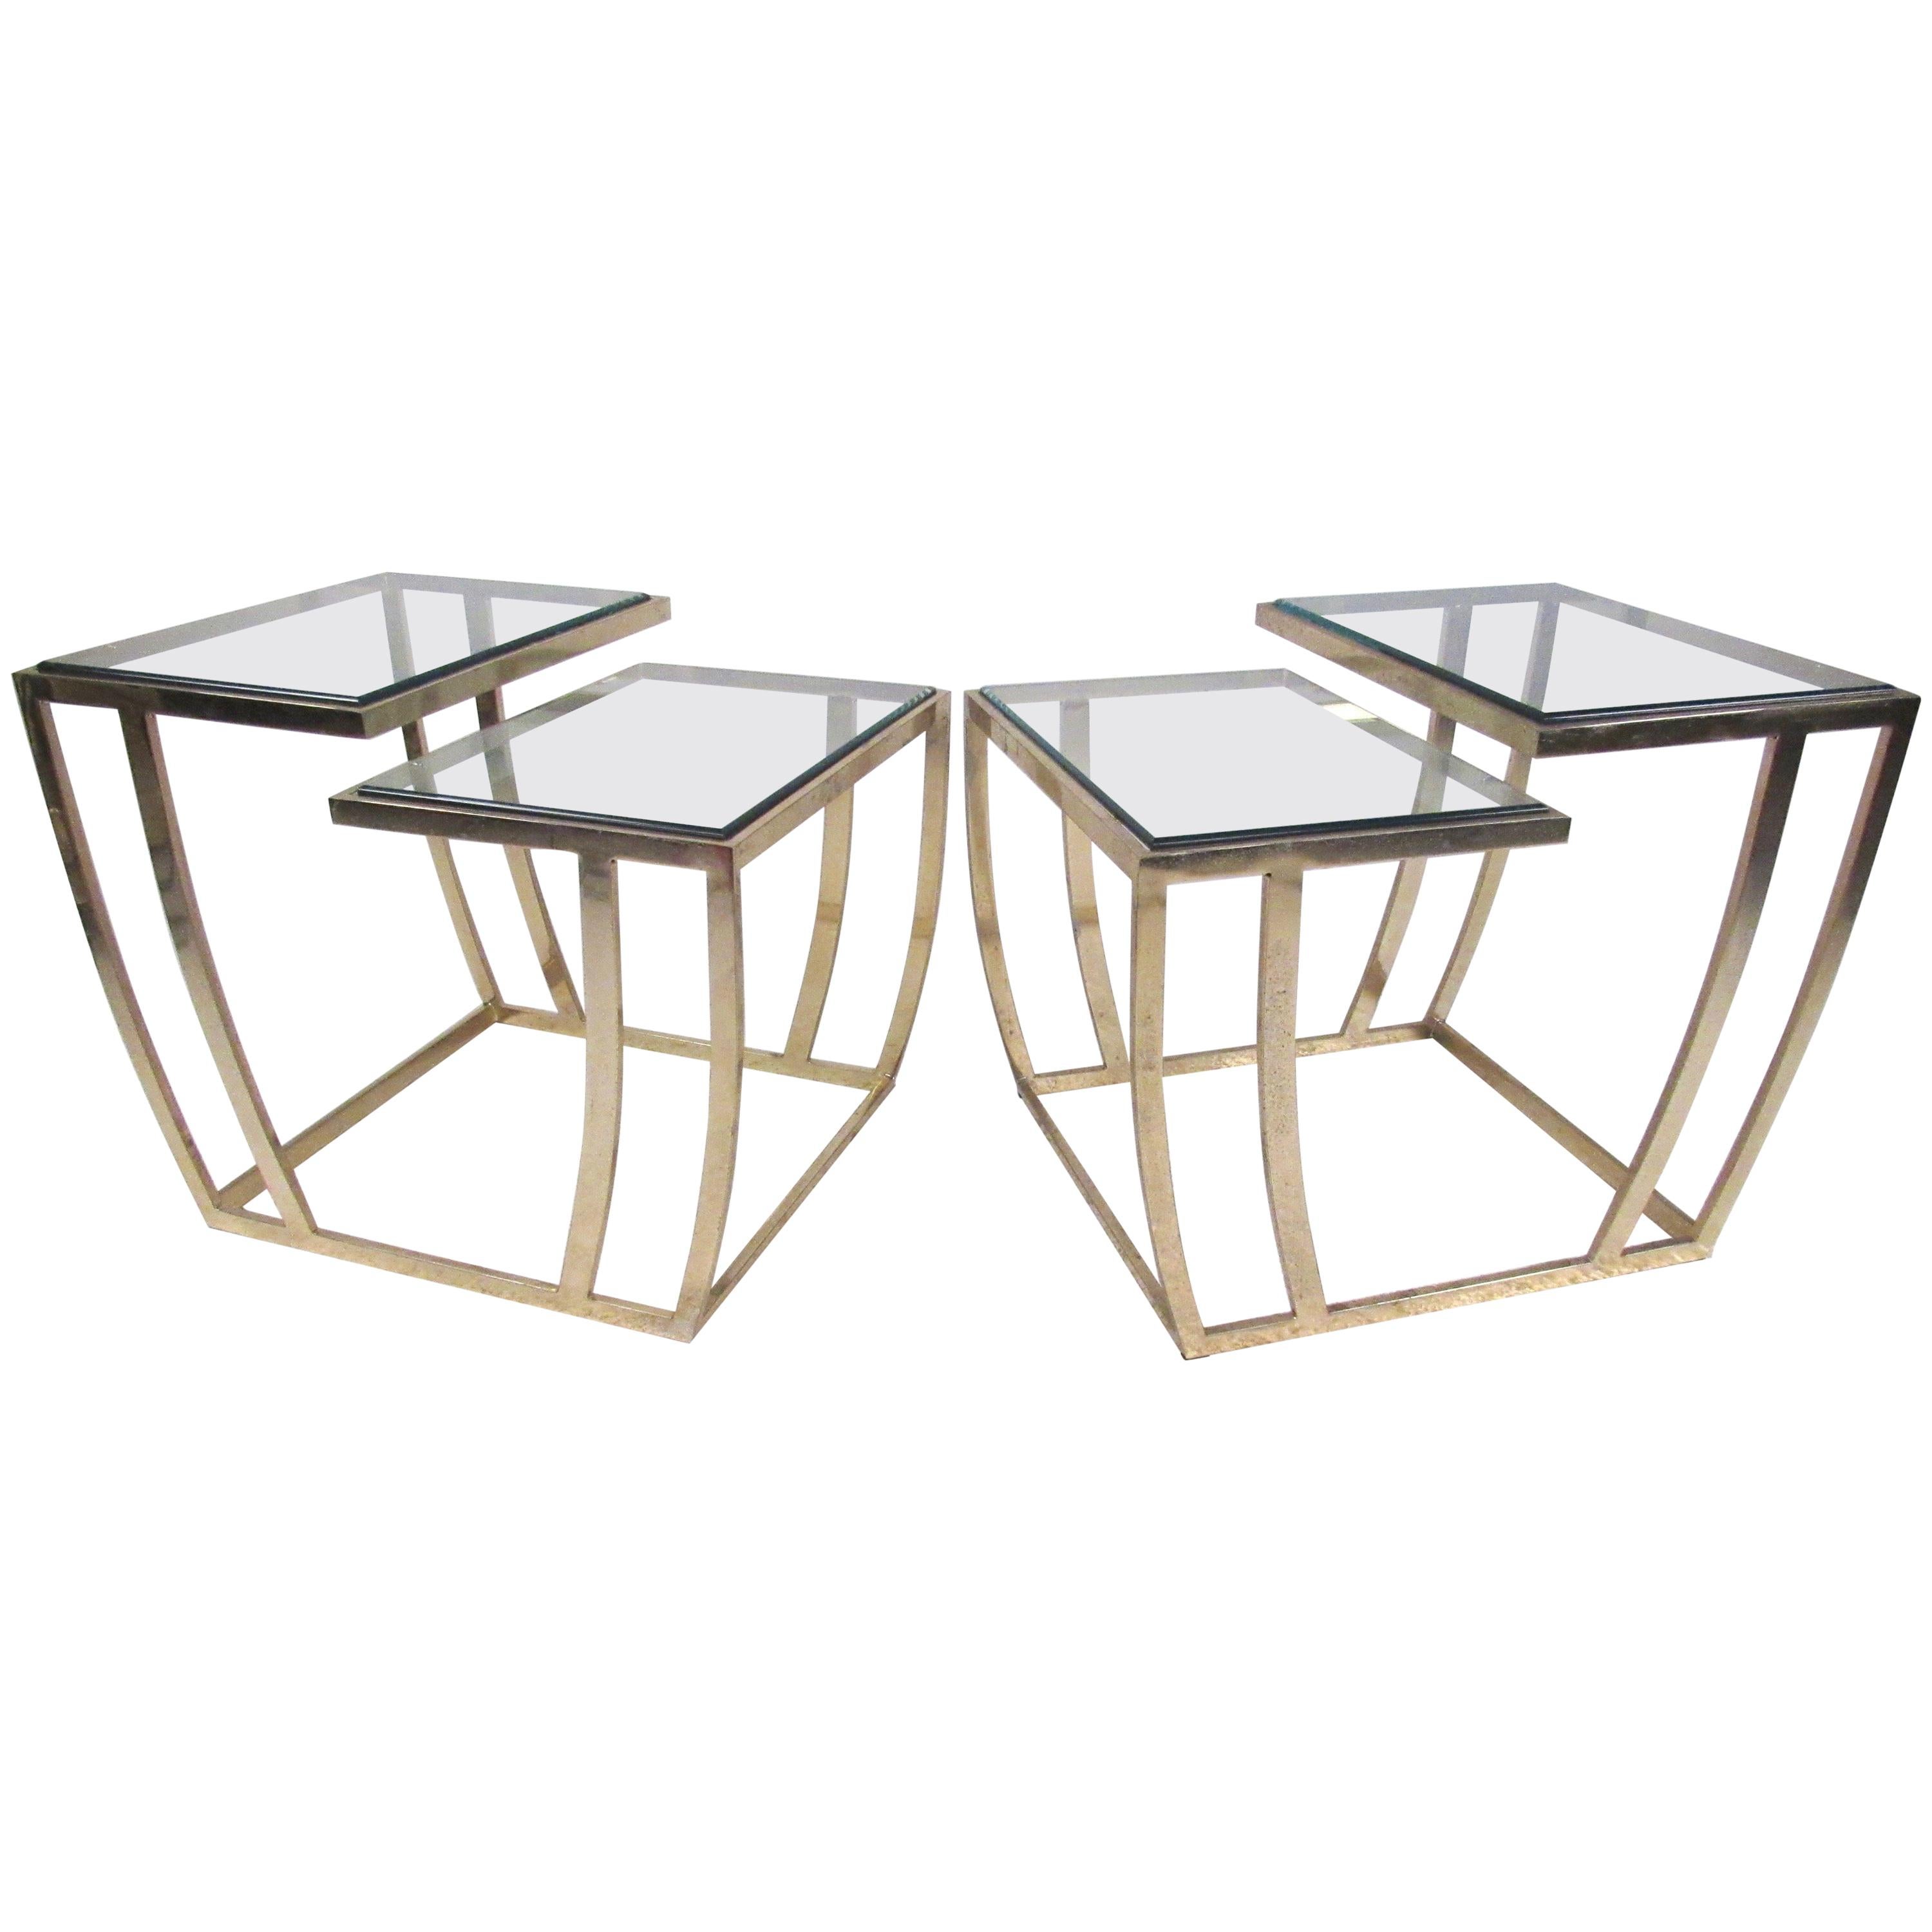 Pair of Modern Brass Finish End Tables